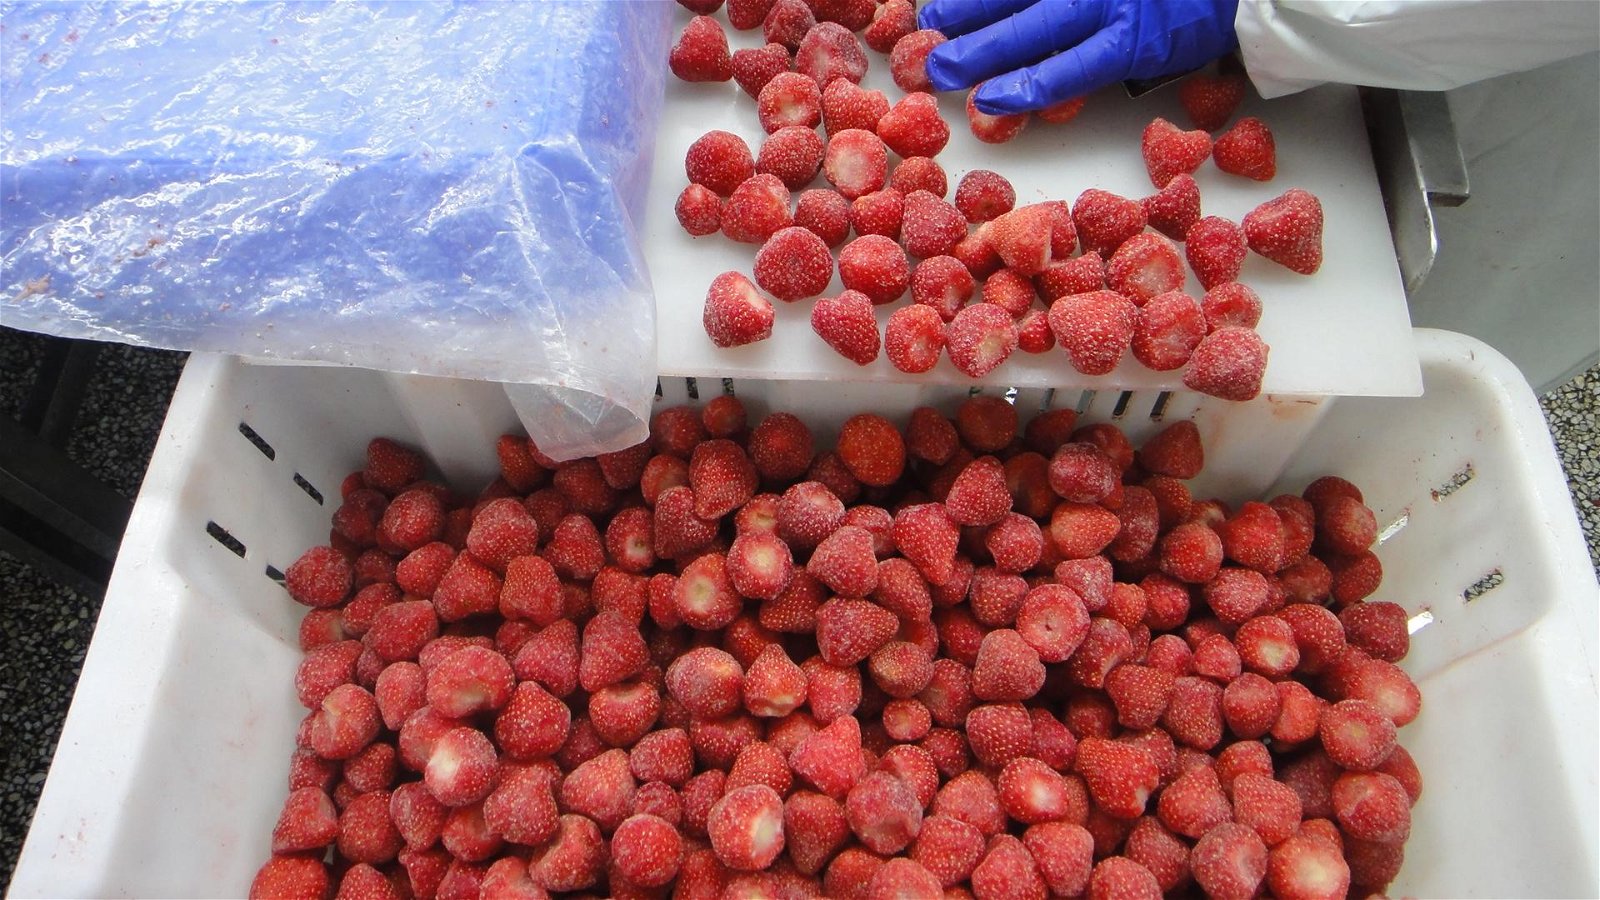 IQF Strawberry,Frozen Strawberries,IQF Whole Strawberry,Sweet Charlie variety 4